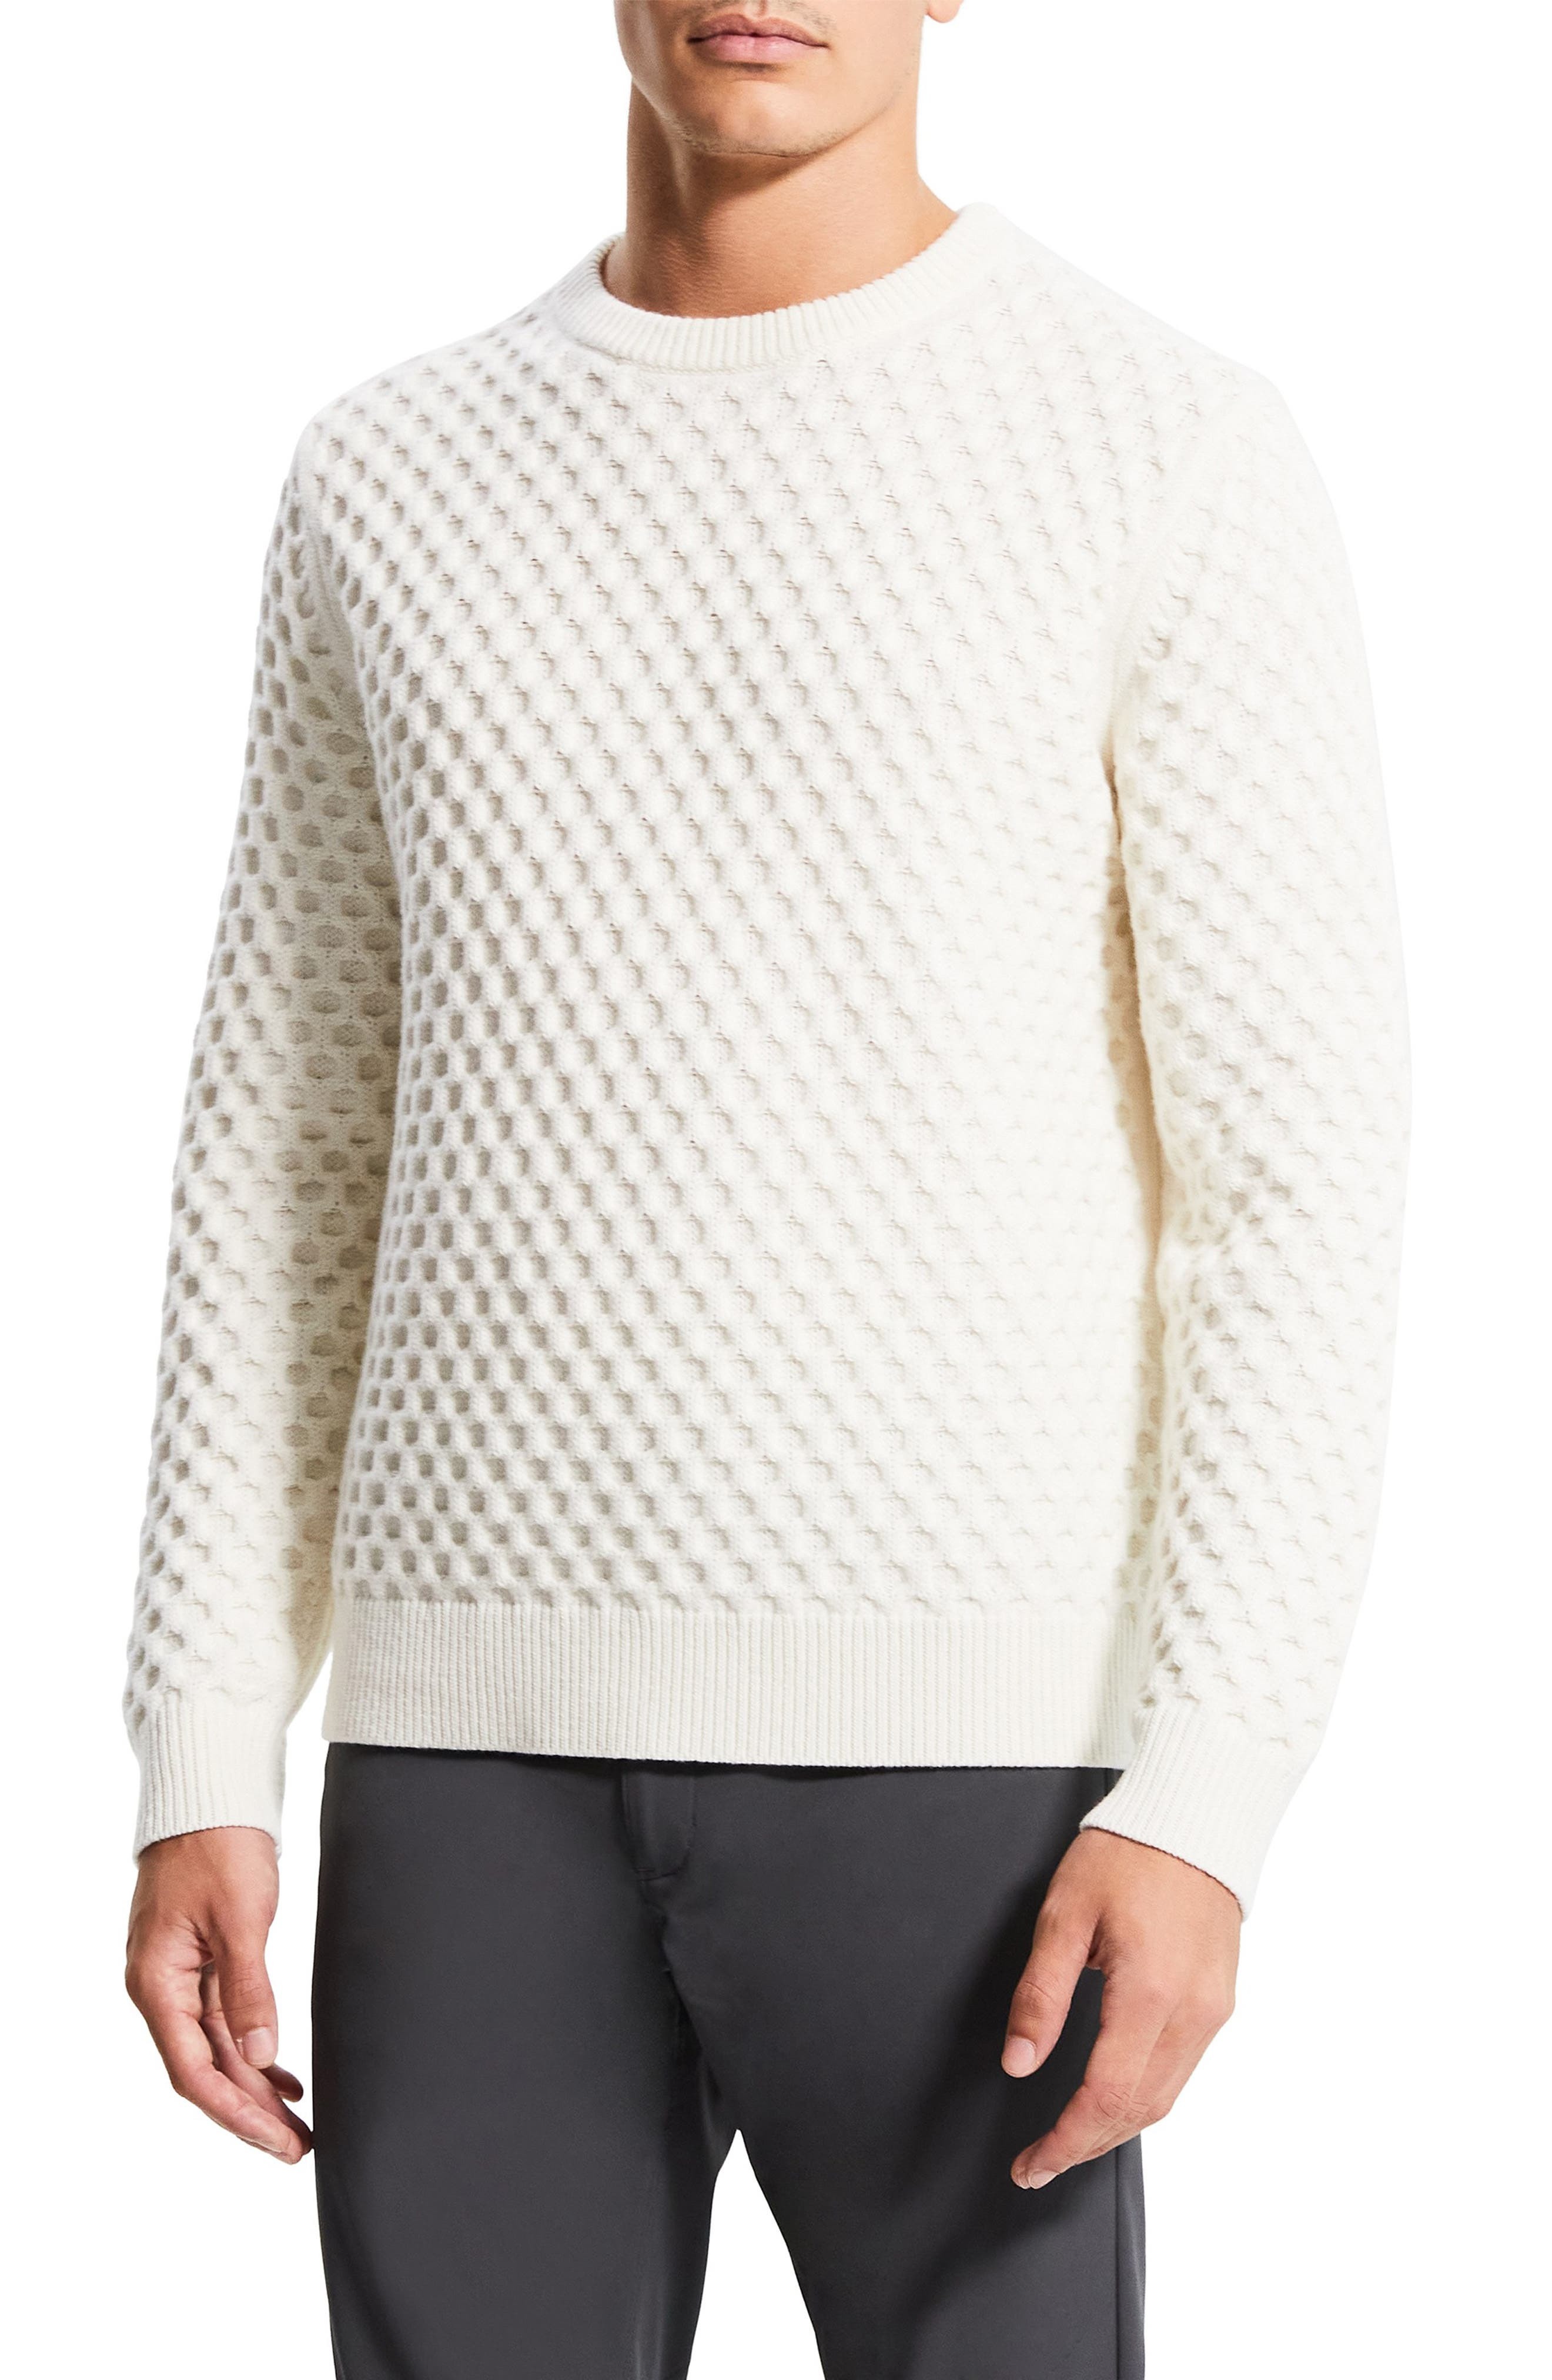 Theory Milton Textured Crewneck Wool Cashmere Sweater, $275 | Nordstrom ...